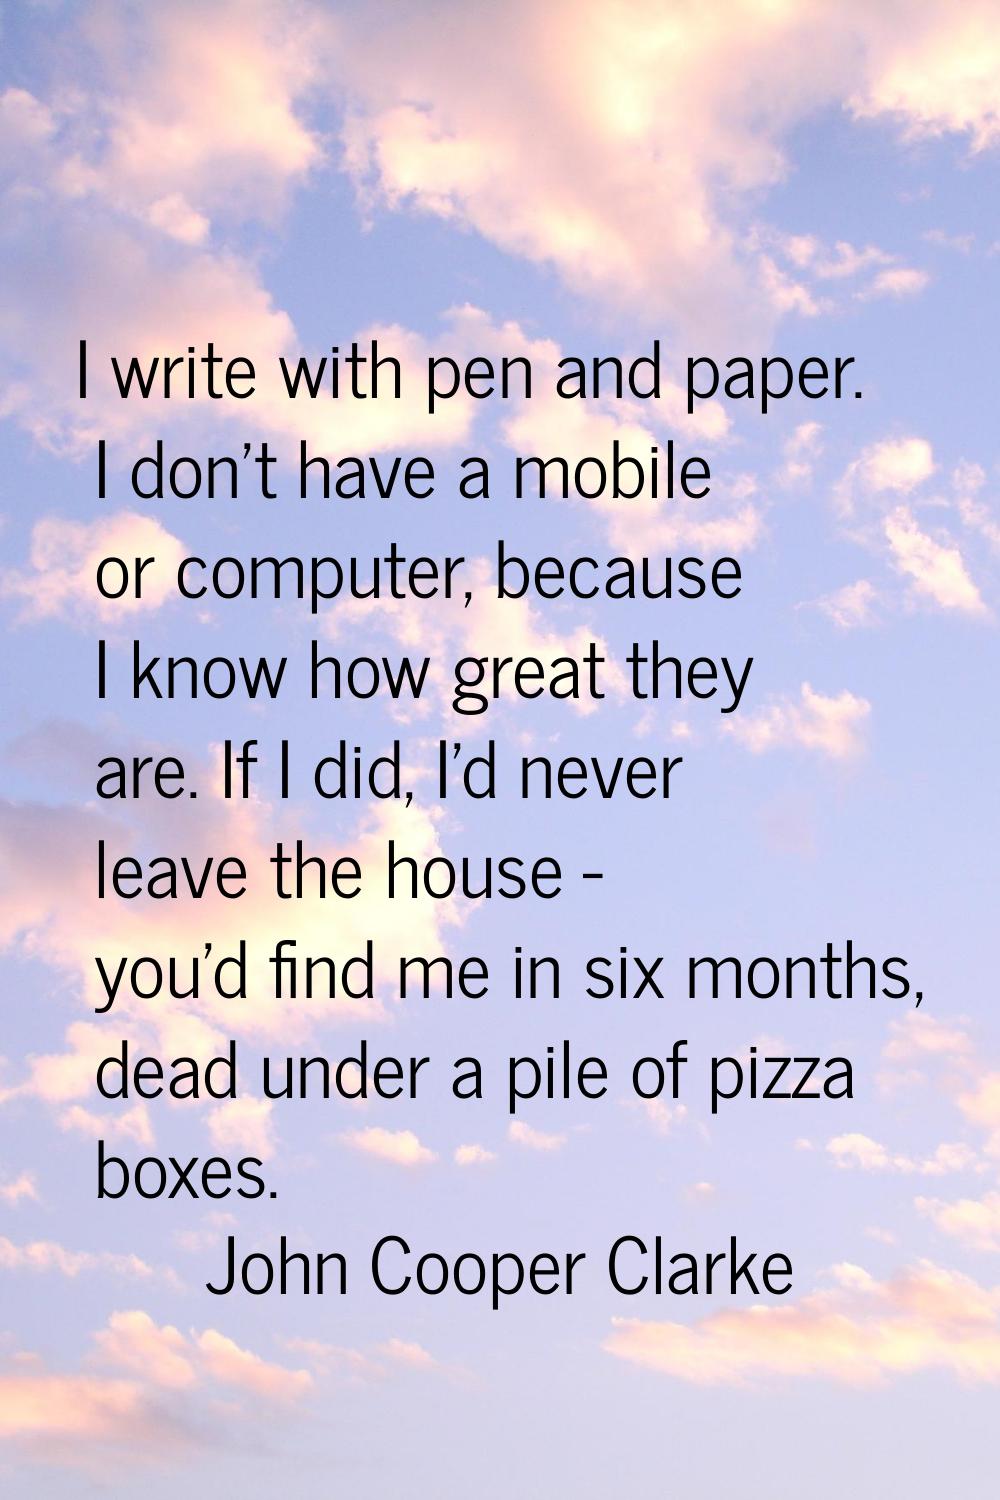 I write with pen and paper. I don't have a mobile or computer, because I know how great they are. I